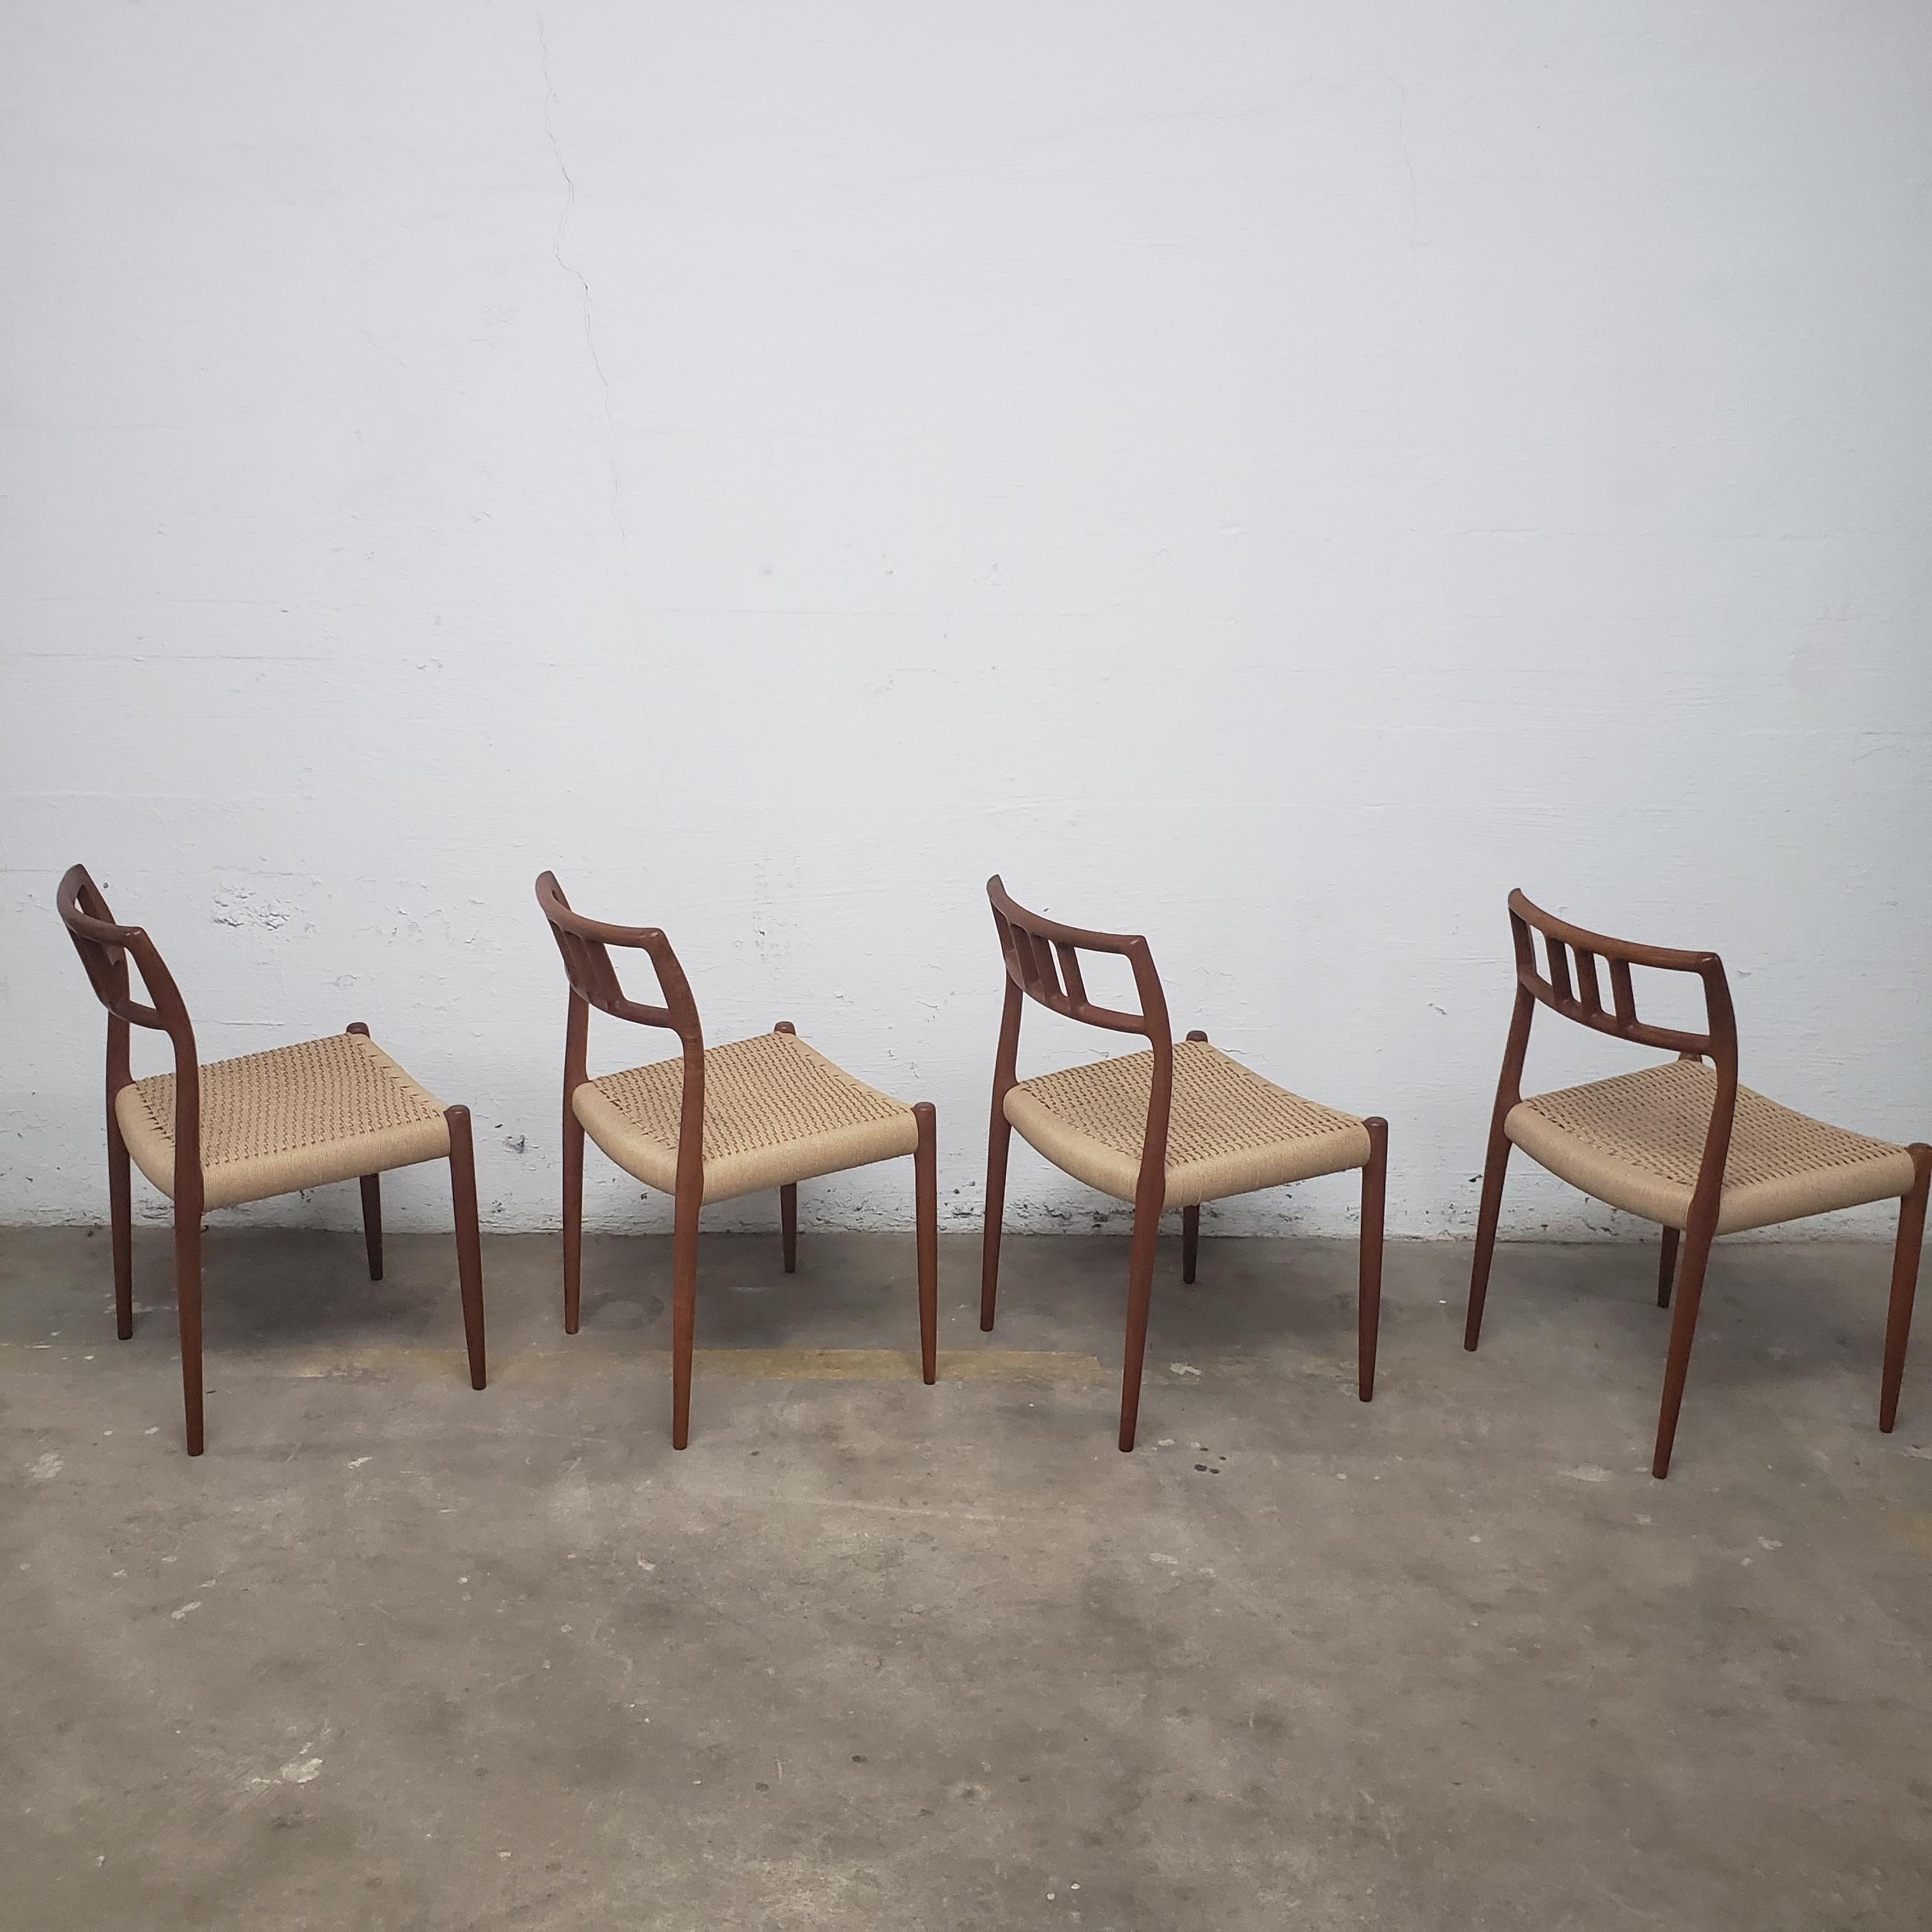 Teak JL Moller model #79 side chairs
Set of four Danish teak side chairs by Neils O. Møller for JL Moller Møbelfabrik. These chairs have new Danish cord seats.
 